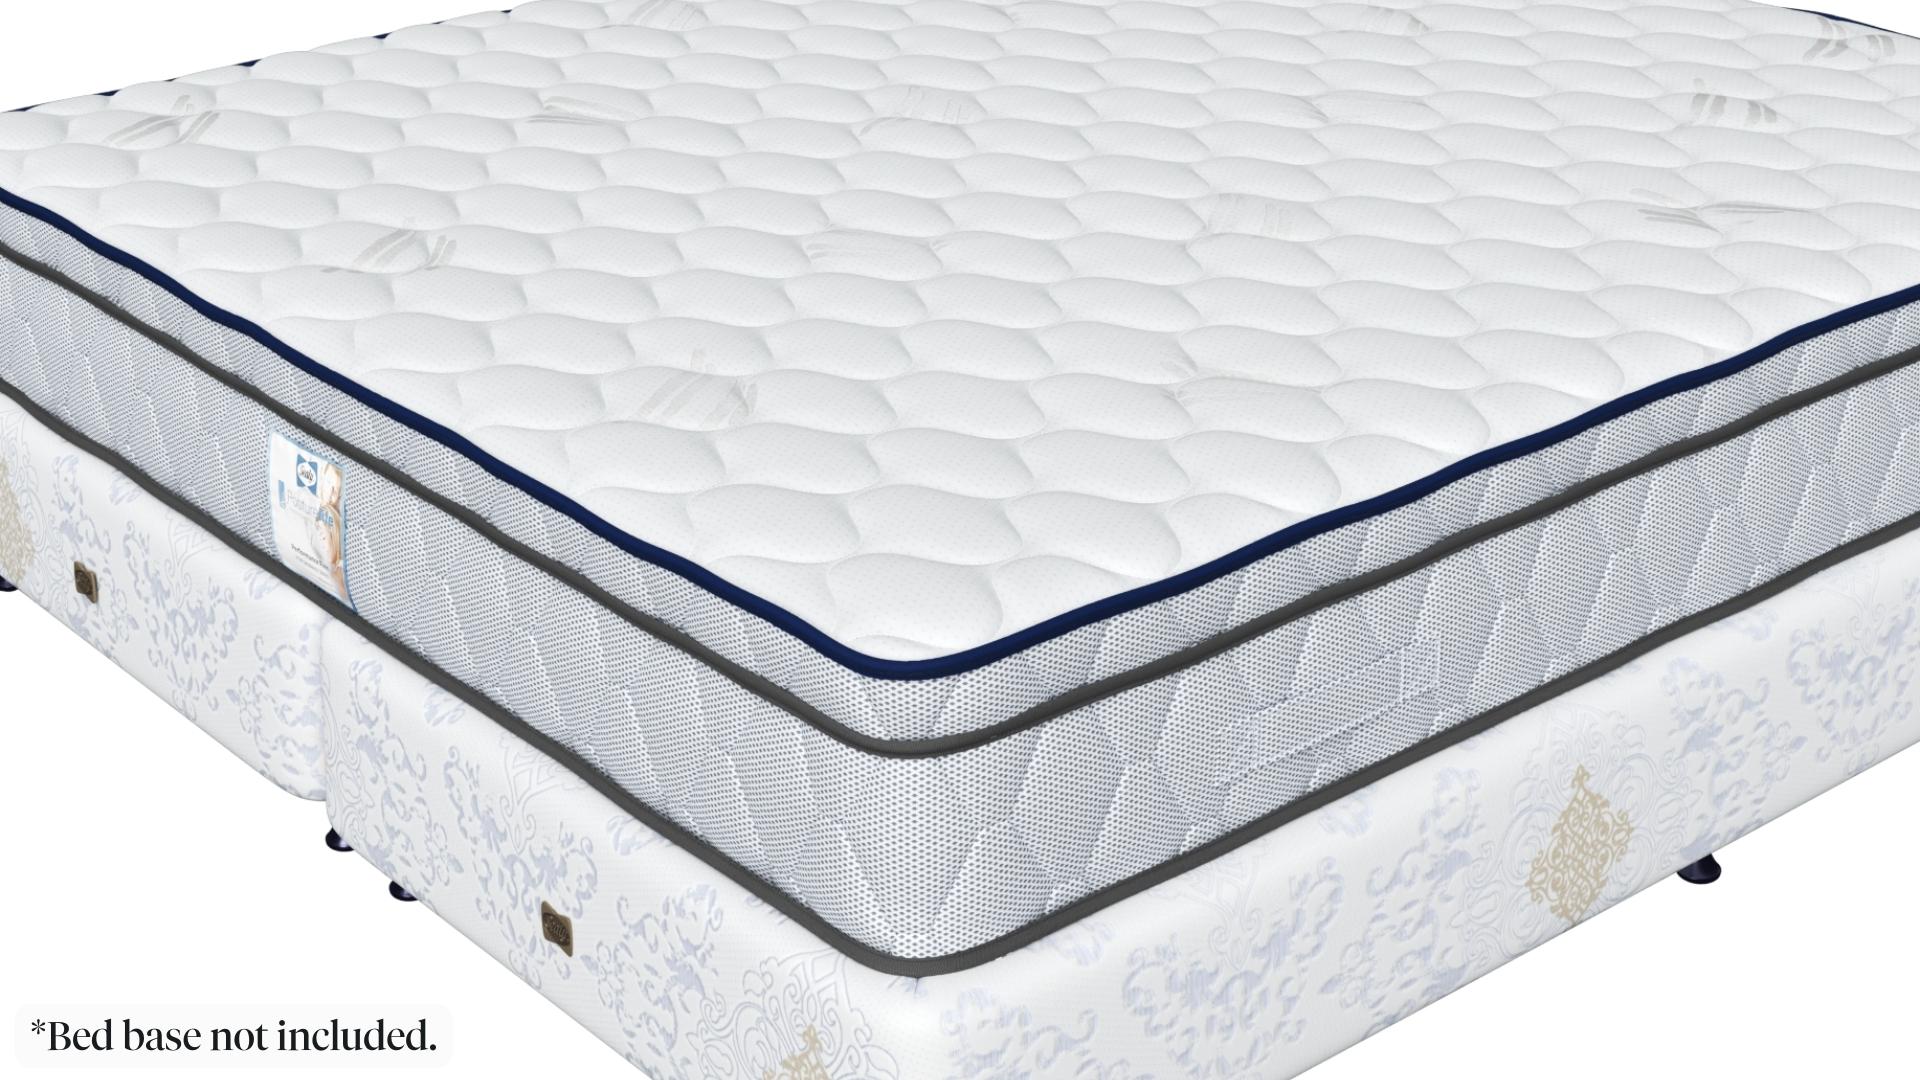 Sealy Posture Life Deluxe Posture Mattress